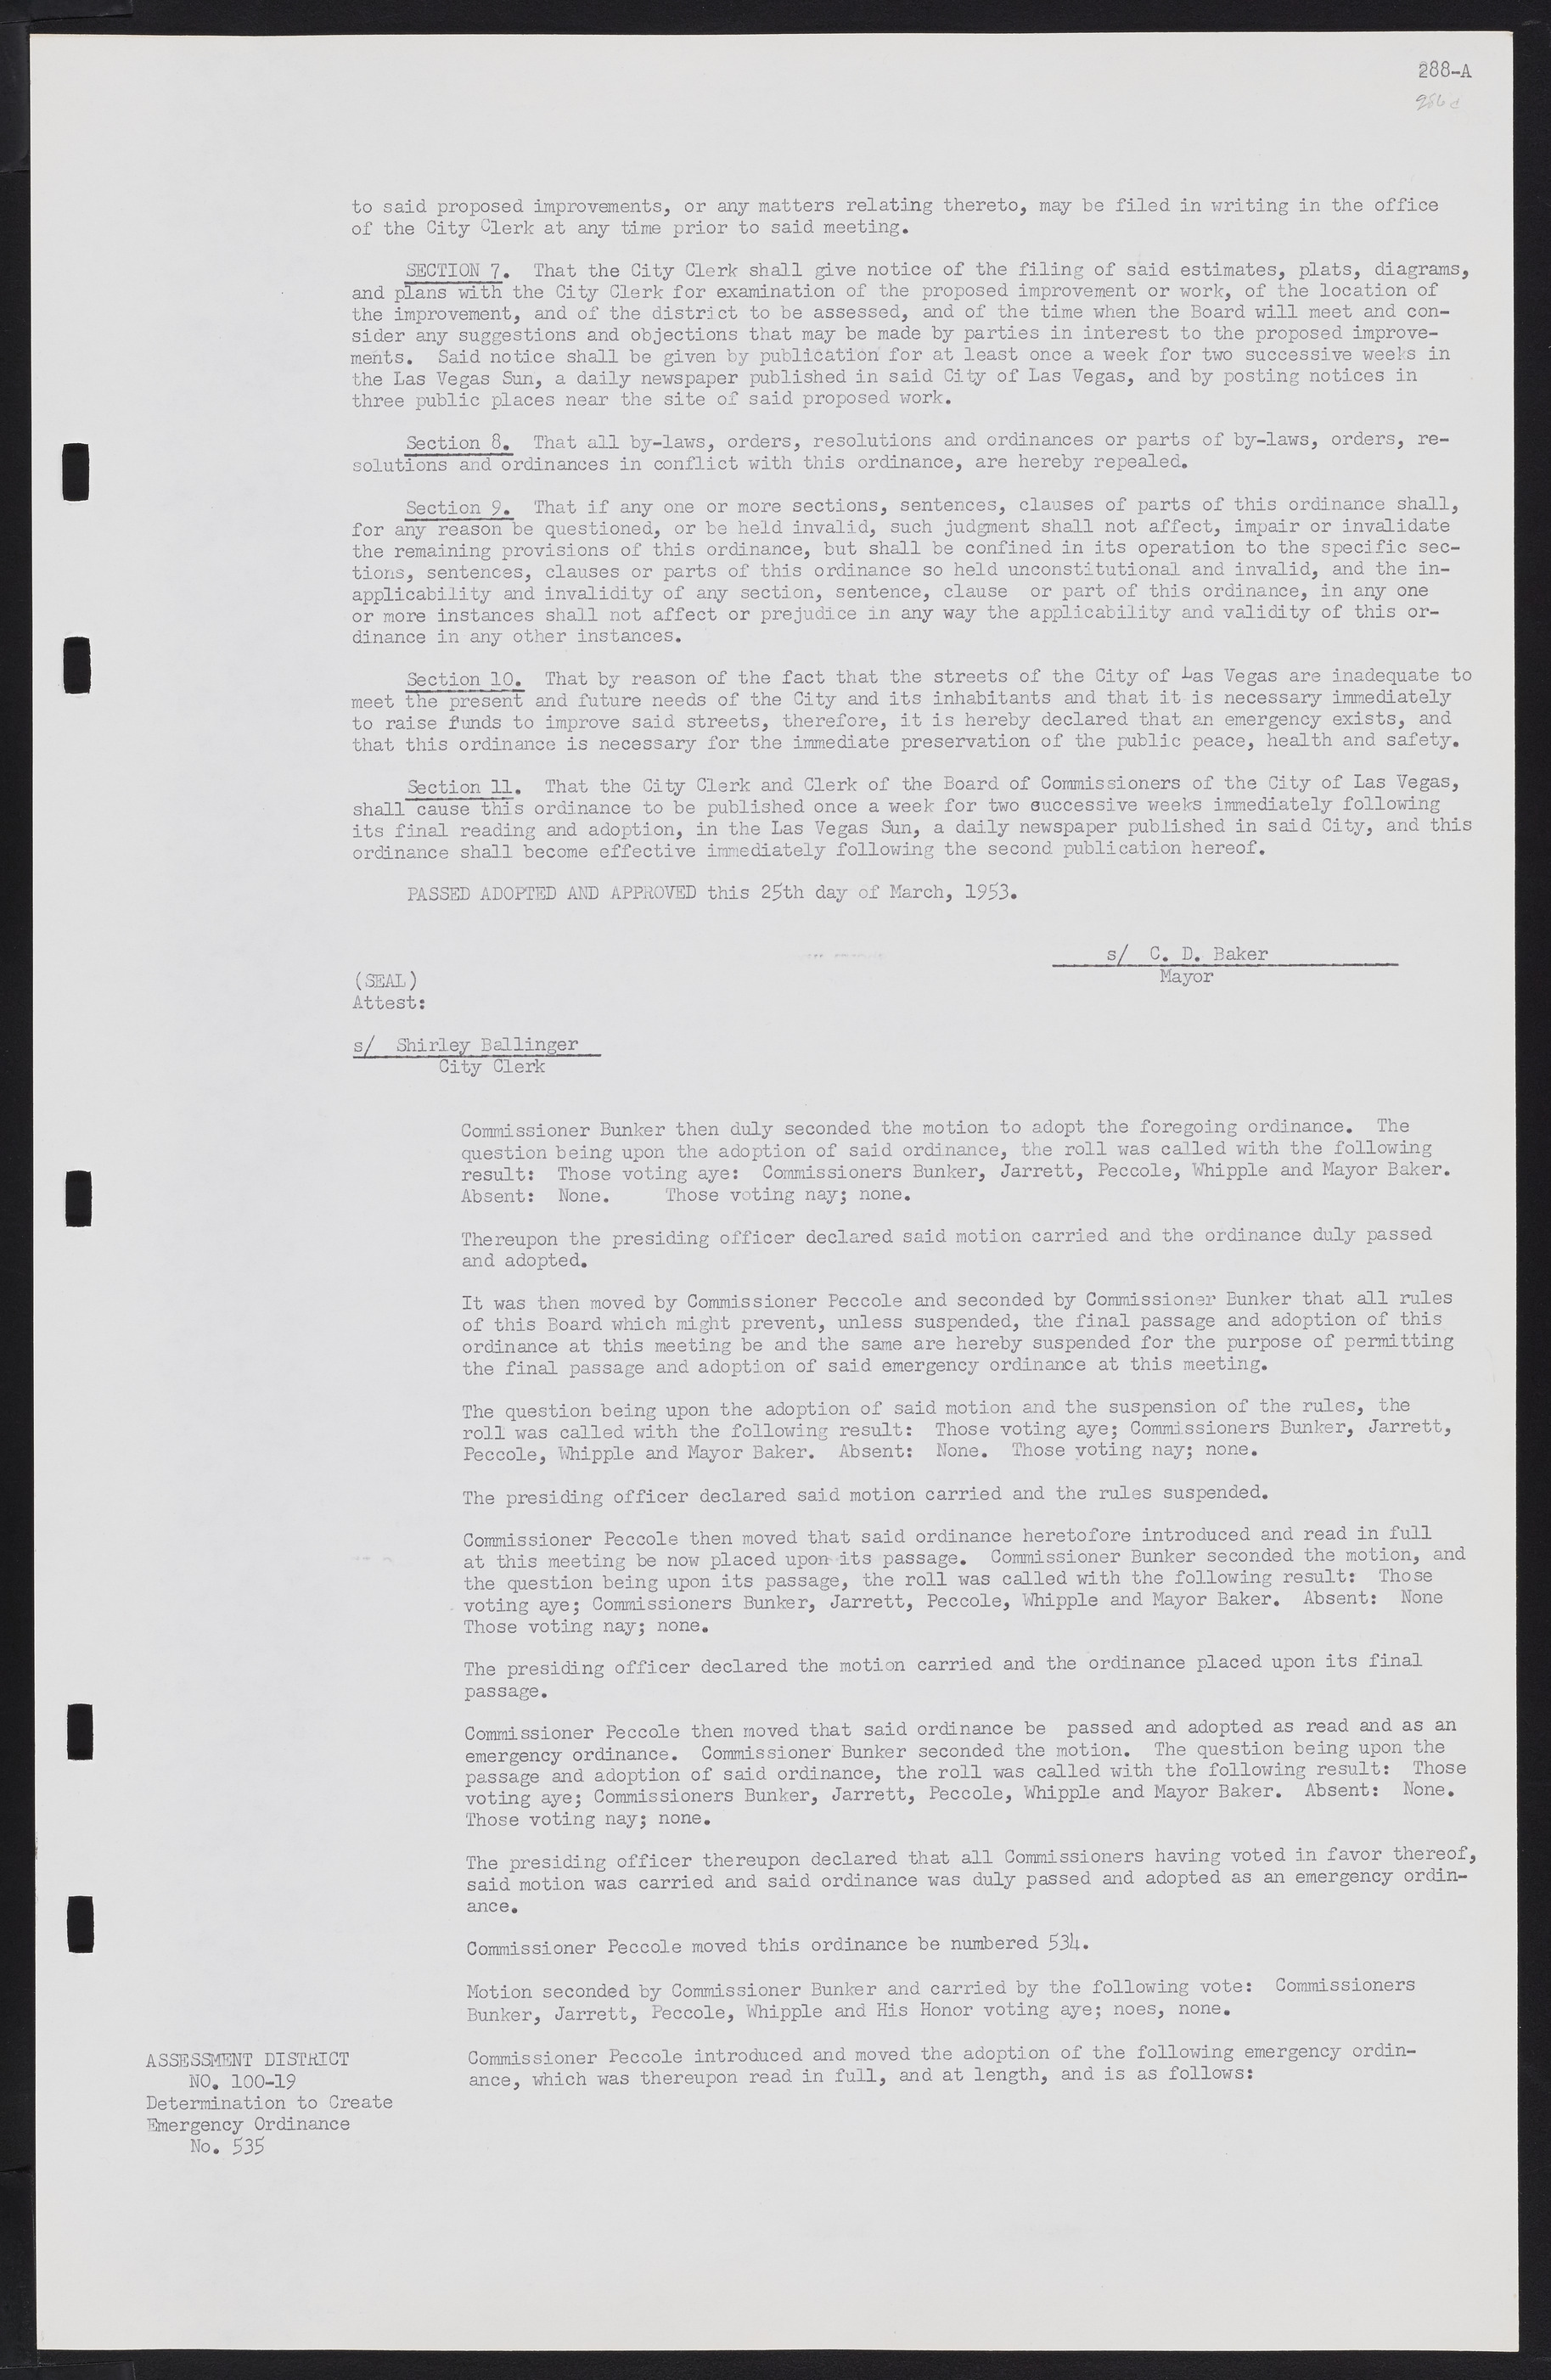 Las Vegas City Commission Minutes, May 26, 1952 to February 17, 1954, lvc000008-305